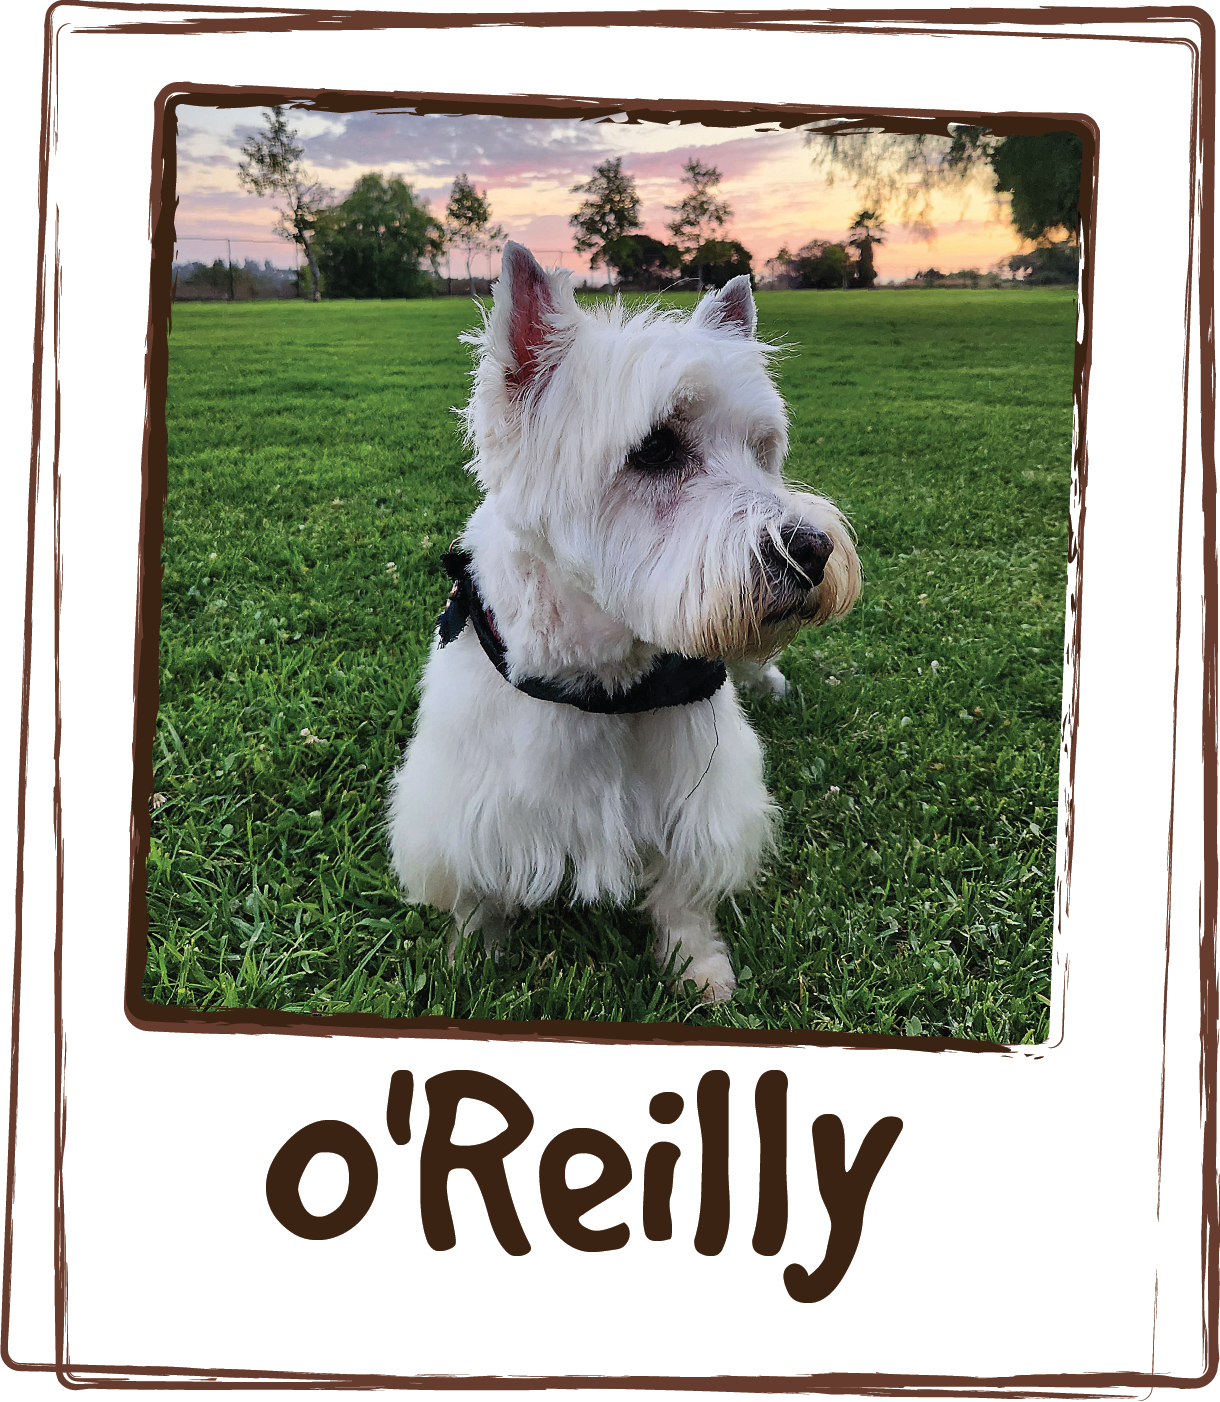  “As O'Reilly gets older he has times of panting and restlessness.  This is especially true at bed time.  We have found the only item to have him relax and get to sleep is the calming Licks. It has helped so much and works within about 30 minutes.” 